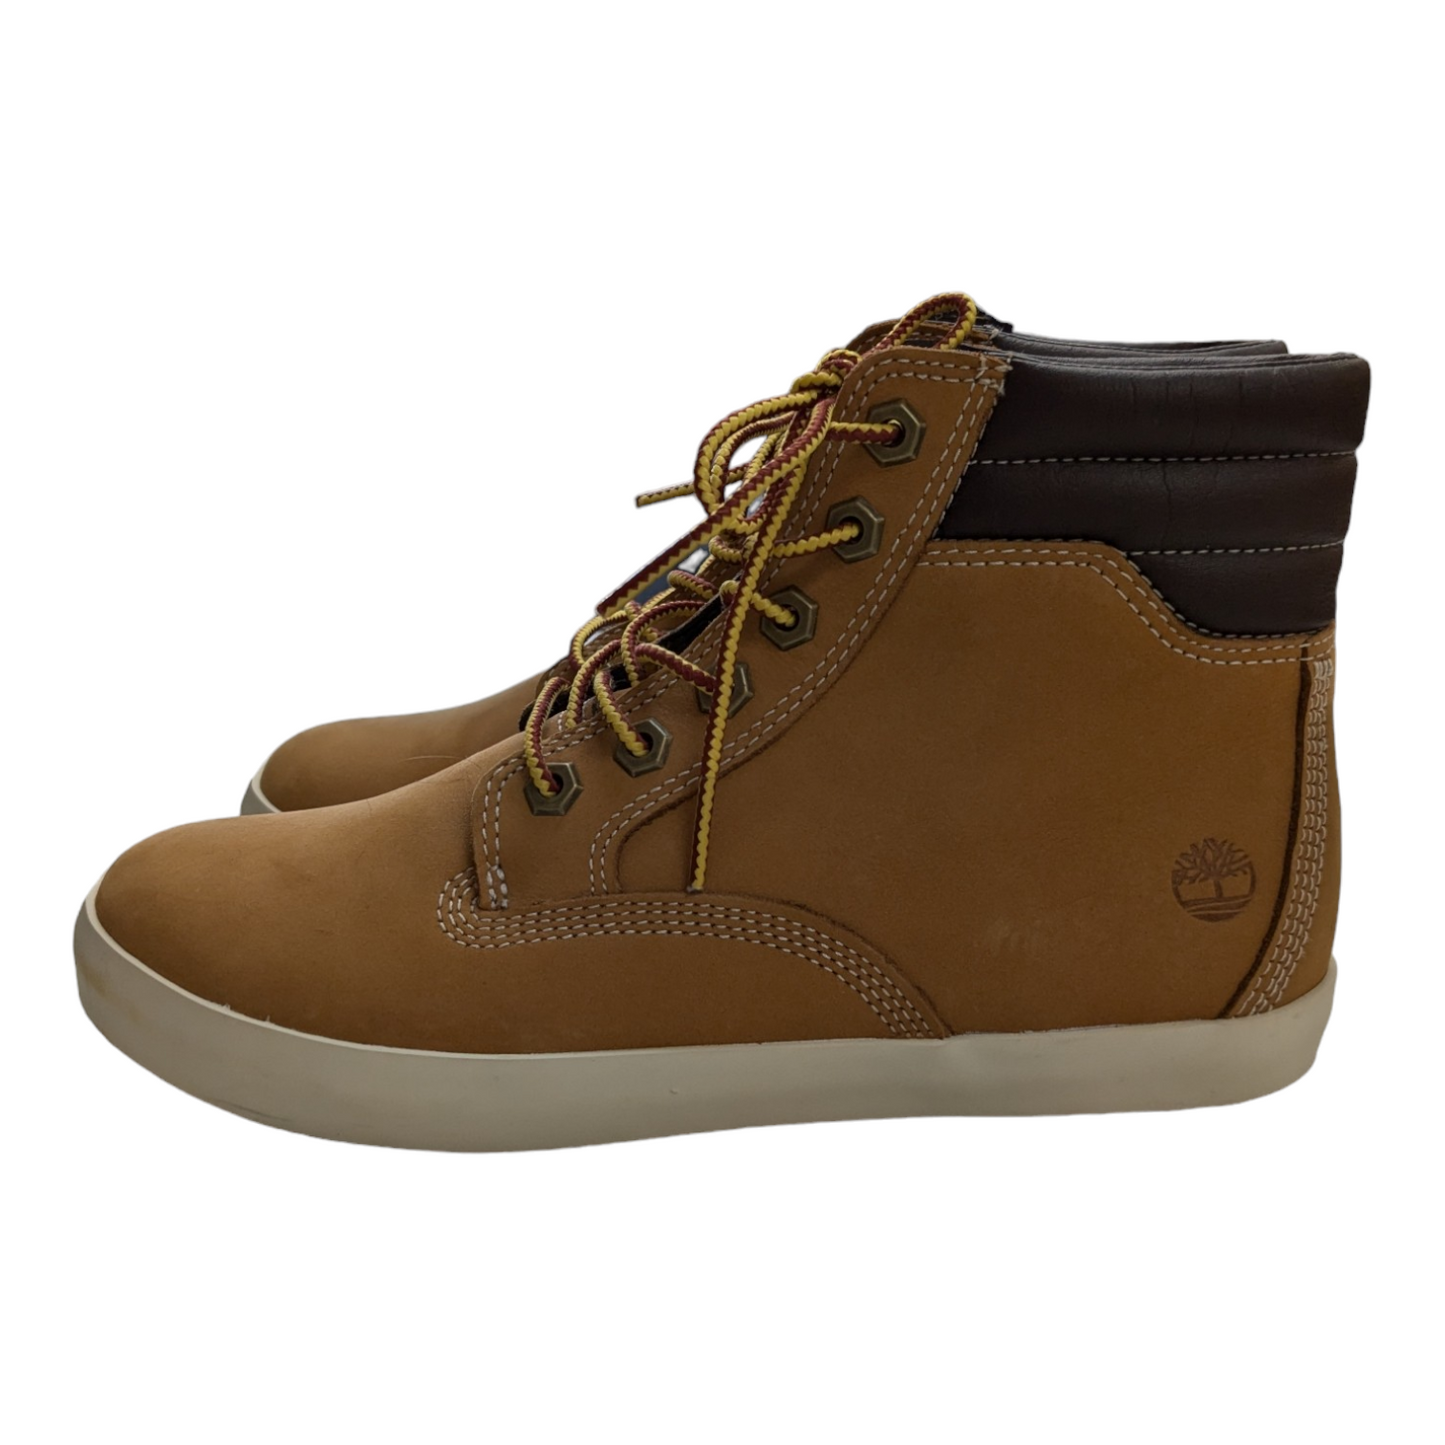 Brown Shoes Sneakers Timberland, Size 7